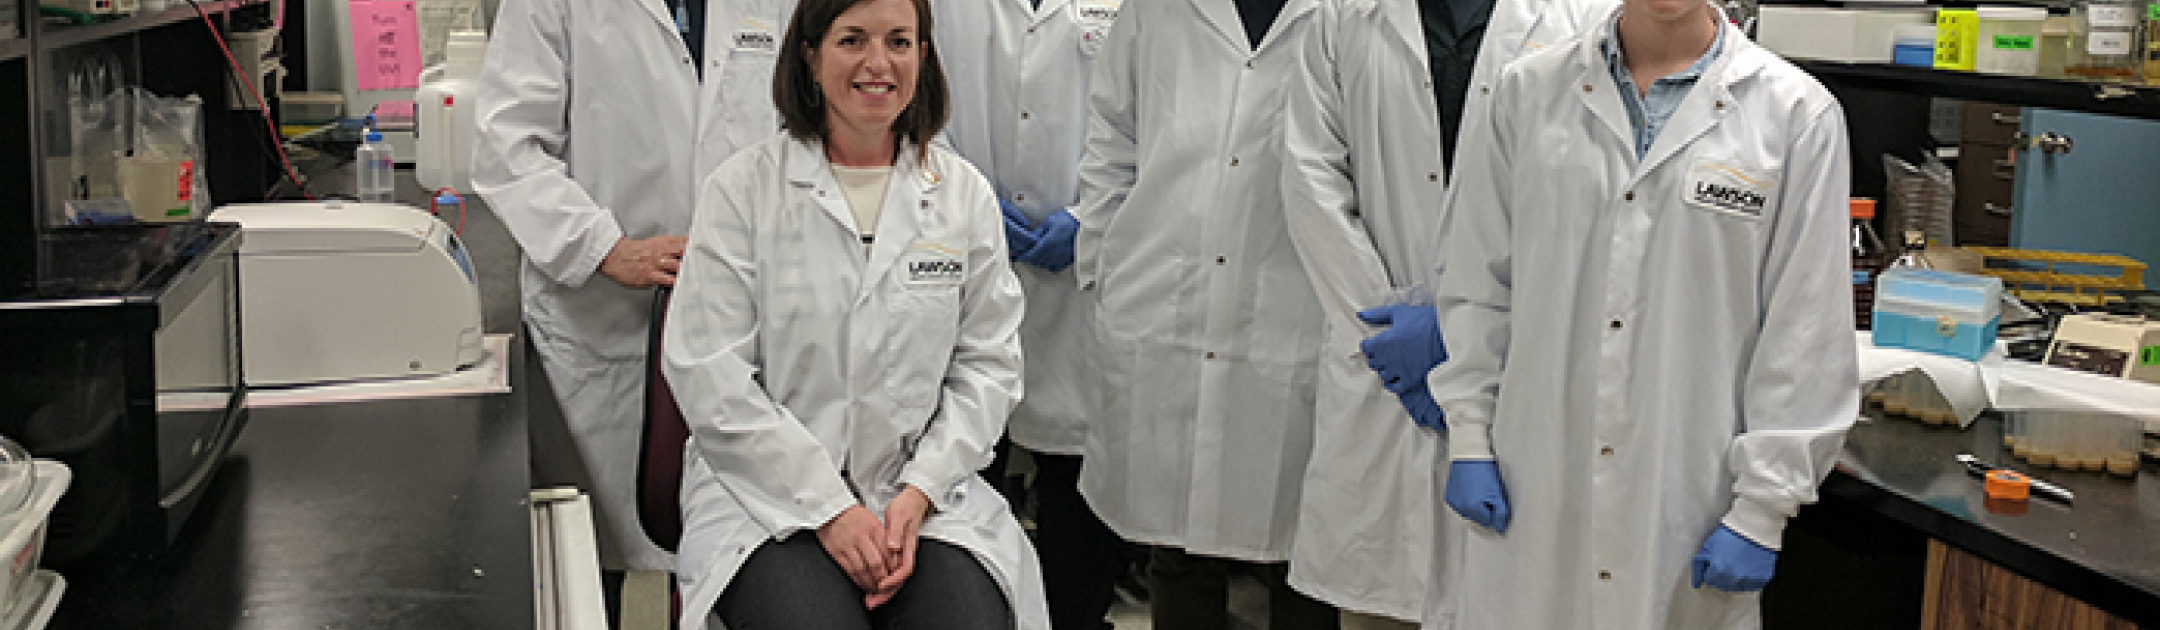 Scientists in the Human Microbiome and Probiotics lab